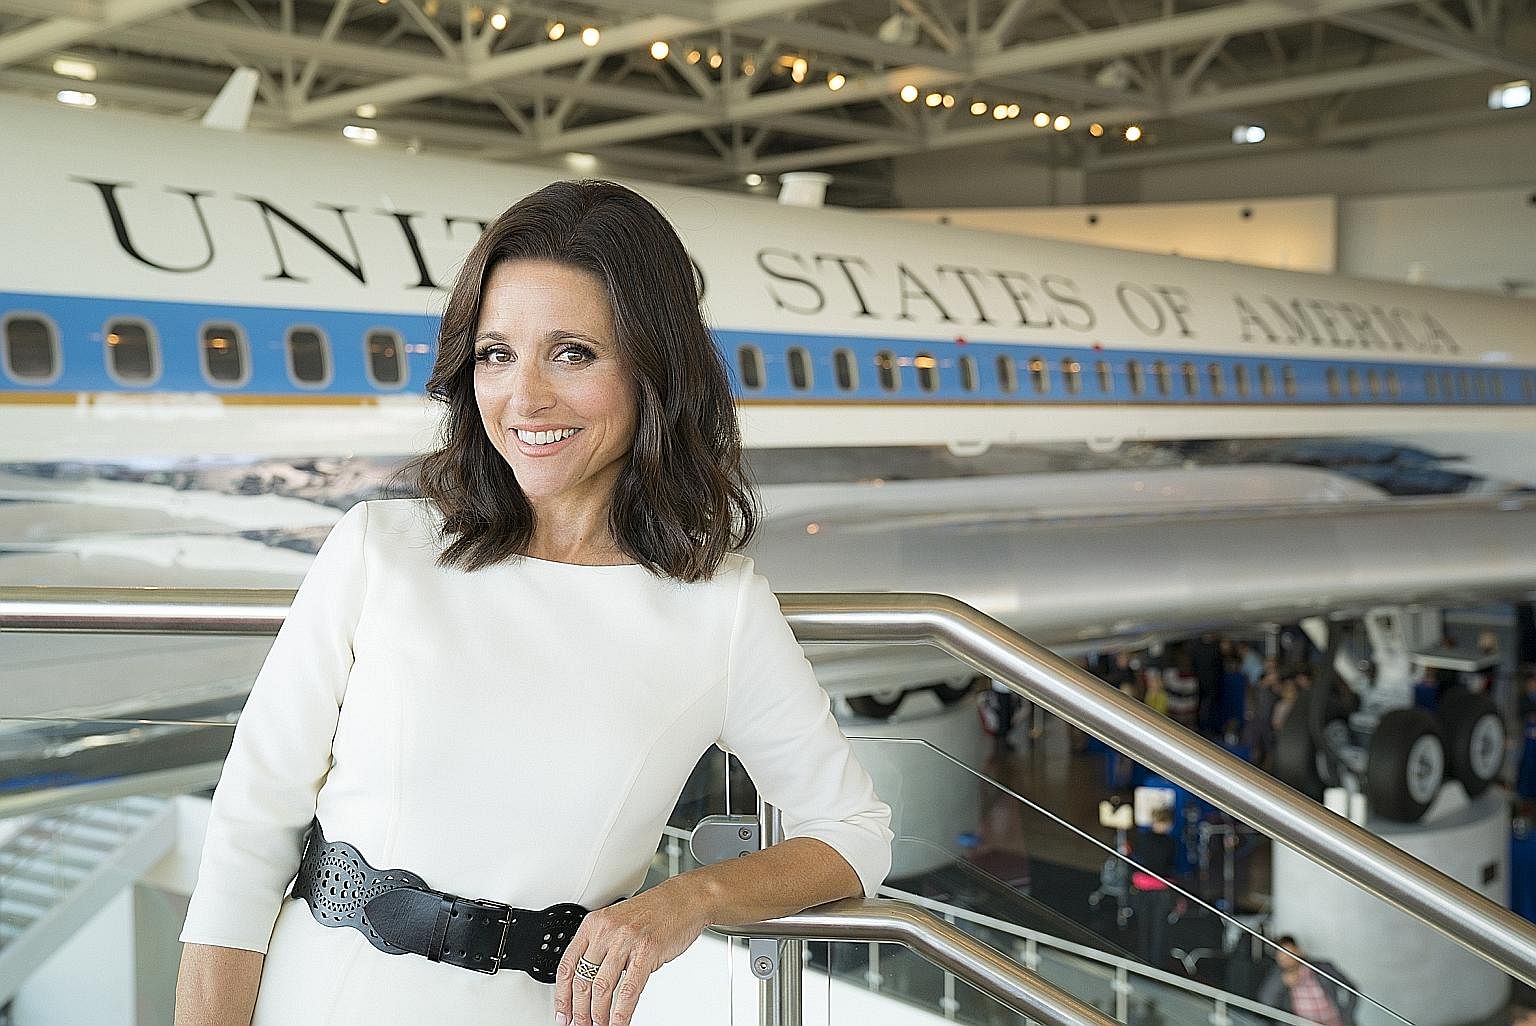 US Vice- President Selina Meyer (played by Julia Louis- Dreyfus, above) continues in her misadventures on Veep.